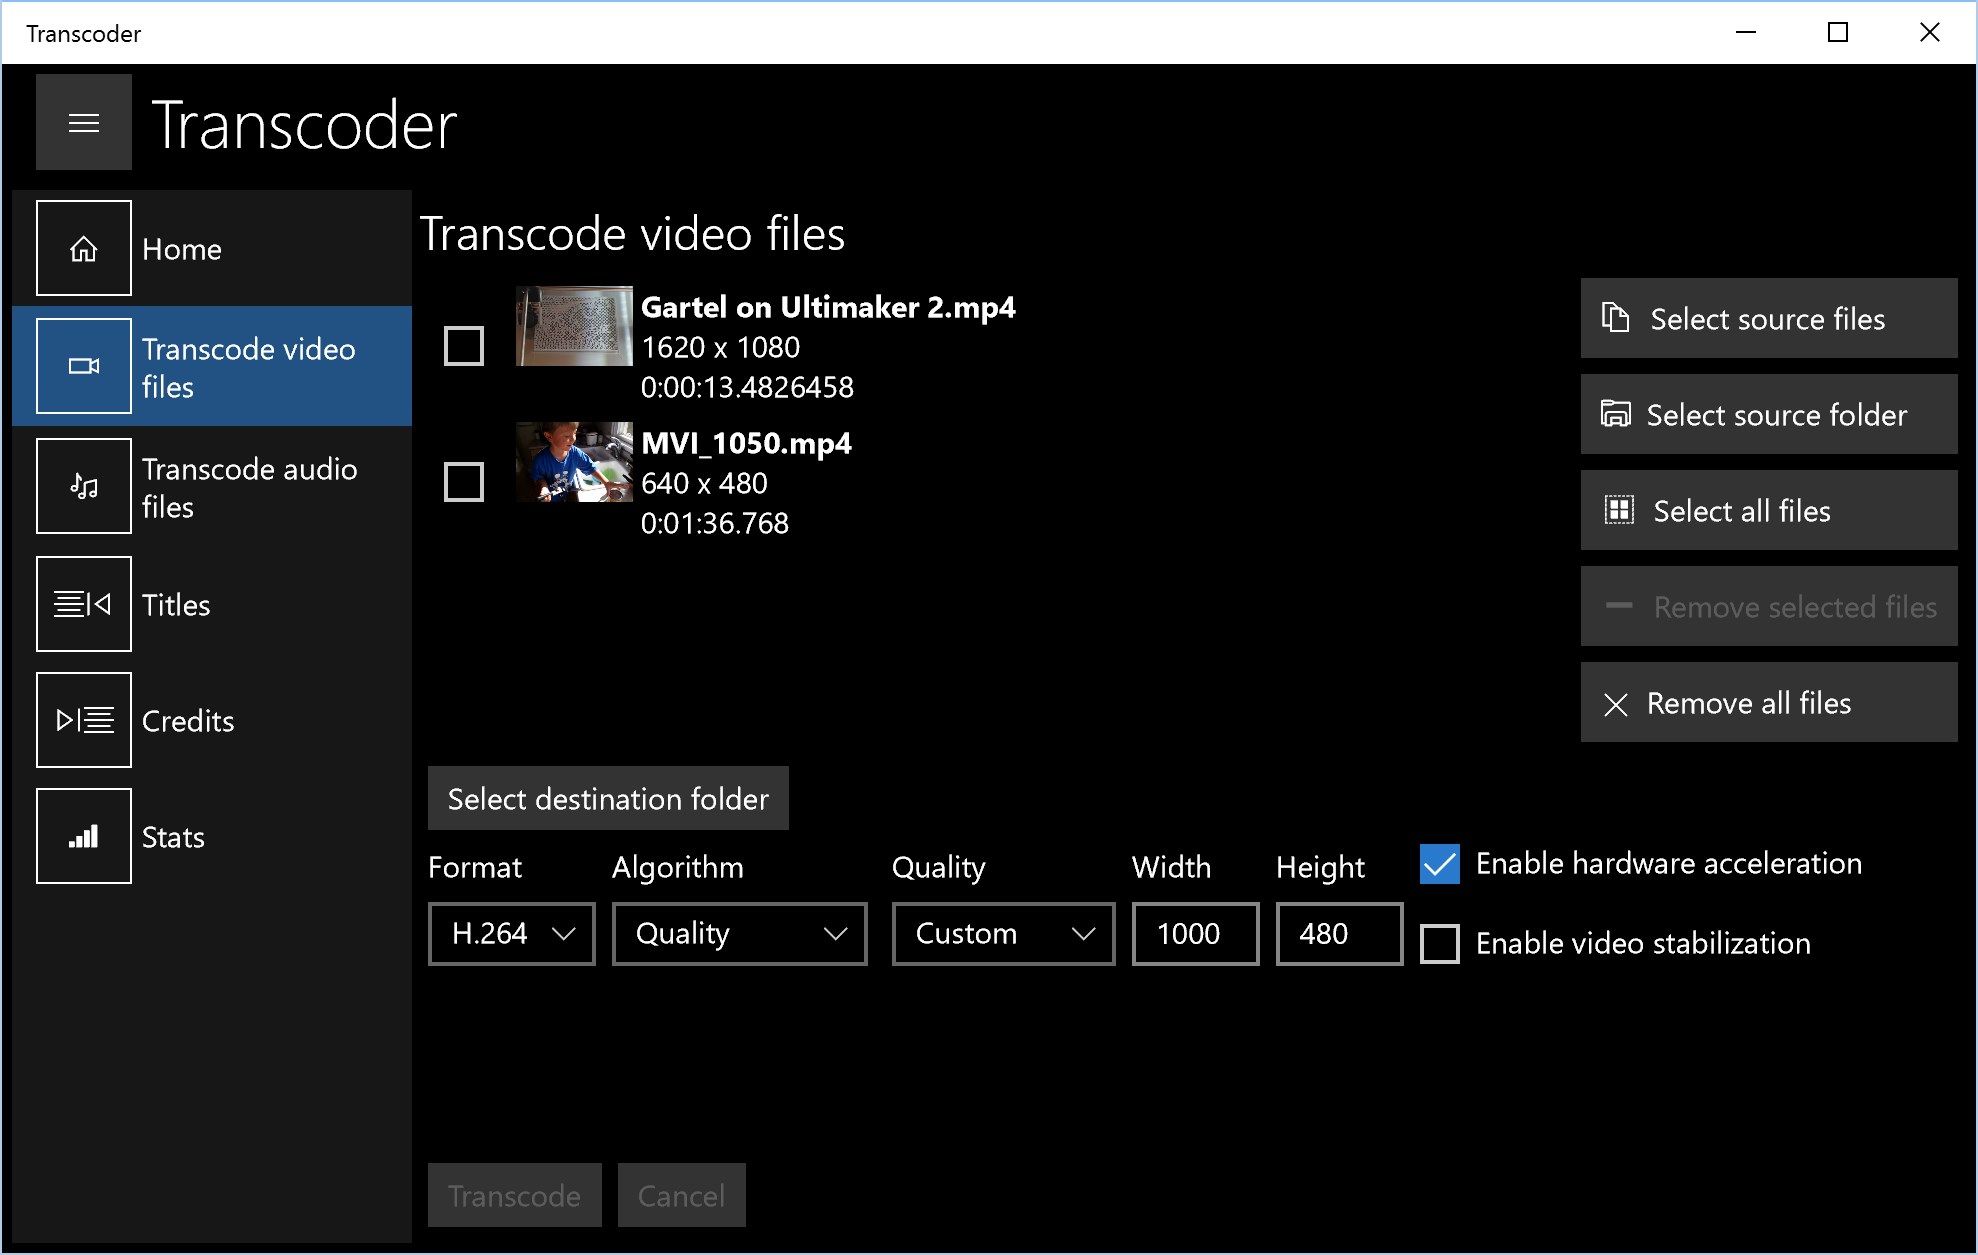 Specify a custom output size for video transcoding.